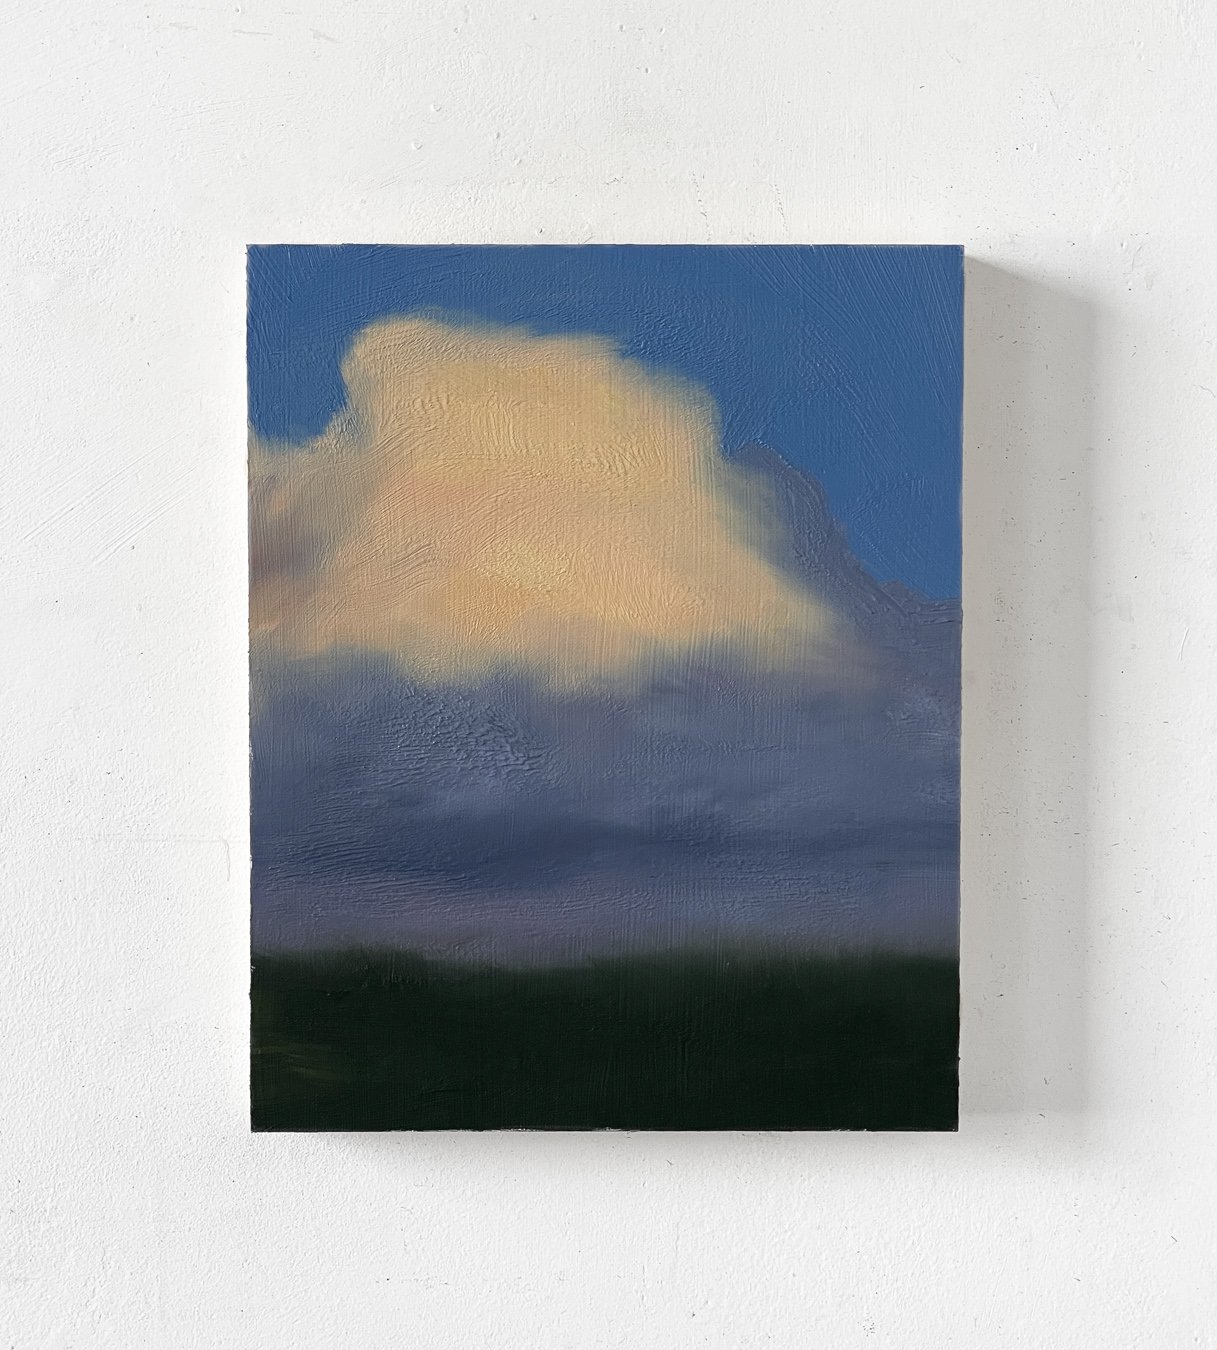  doubles, cloud is a mountain  8 x 10 